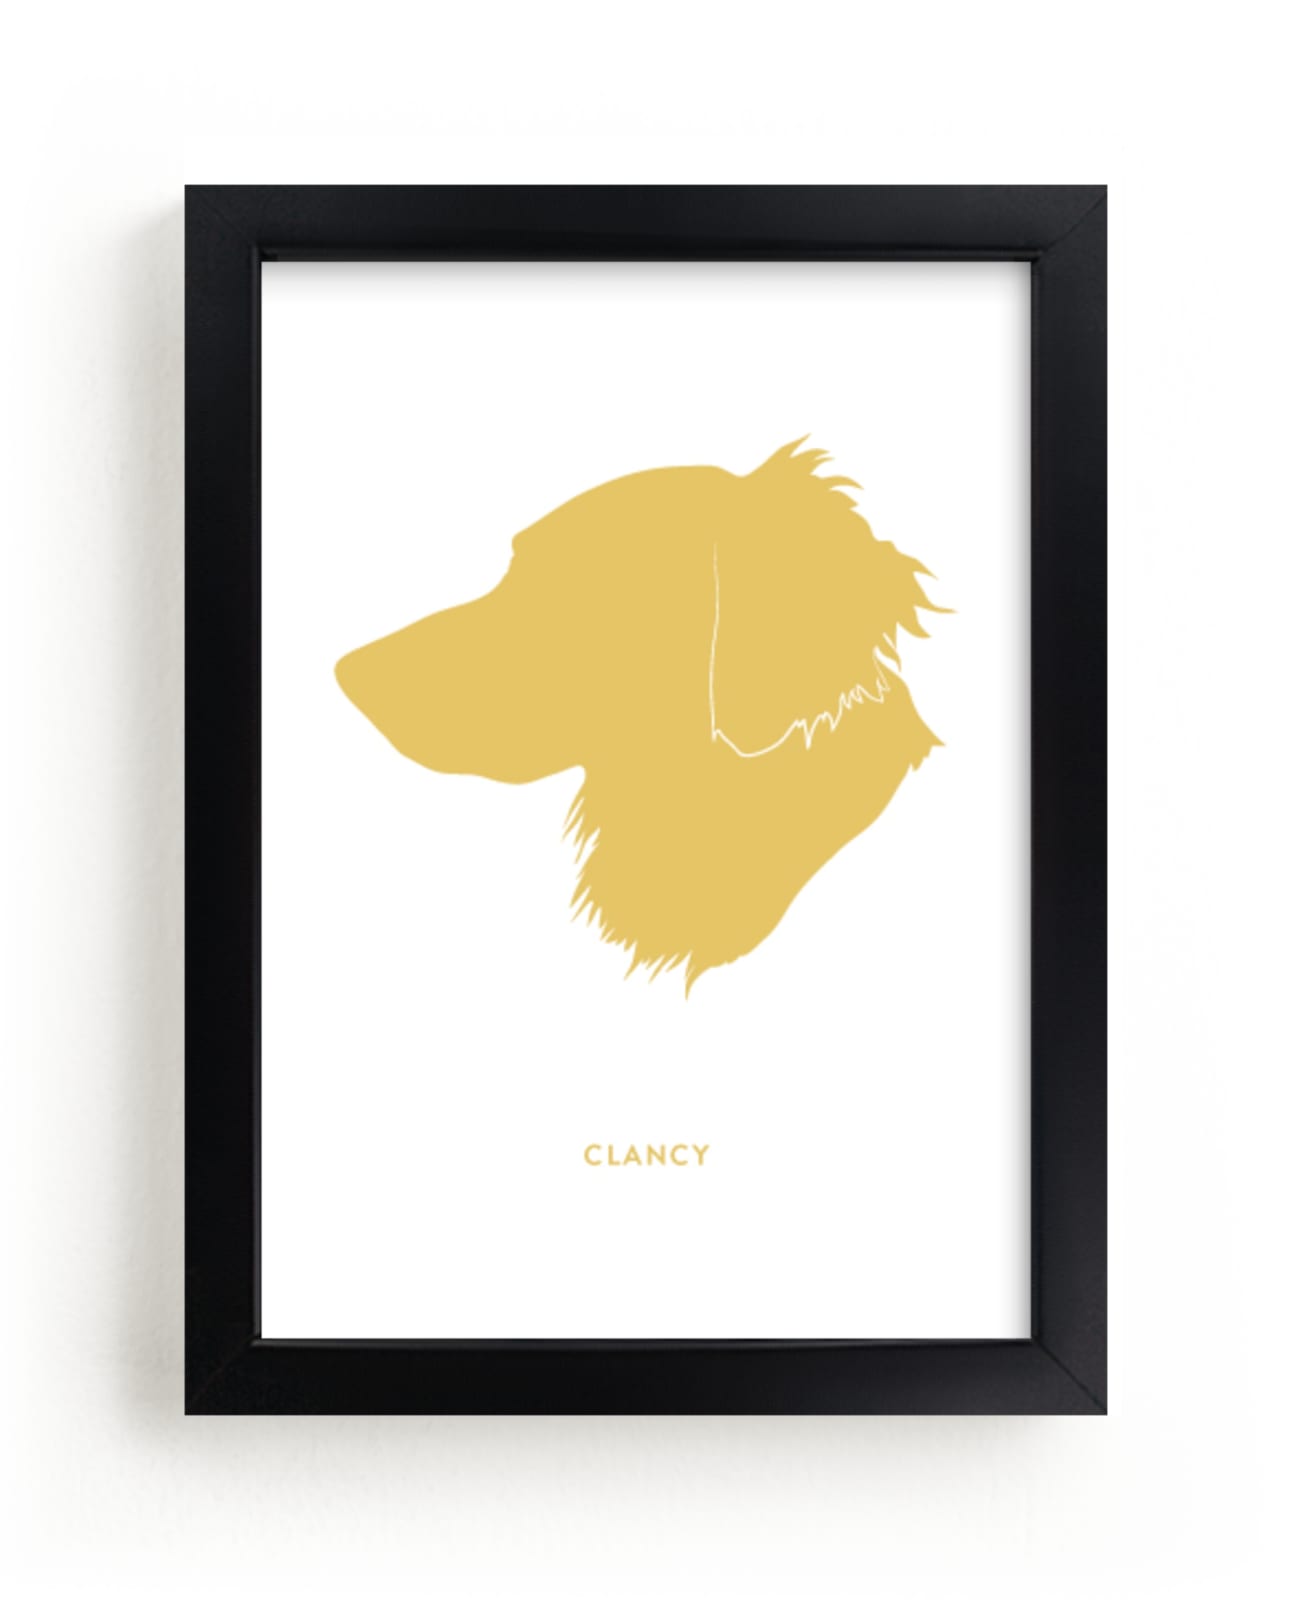 This is a yellow silhouette art by Minted called Custom Pet Silhouette Art.